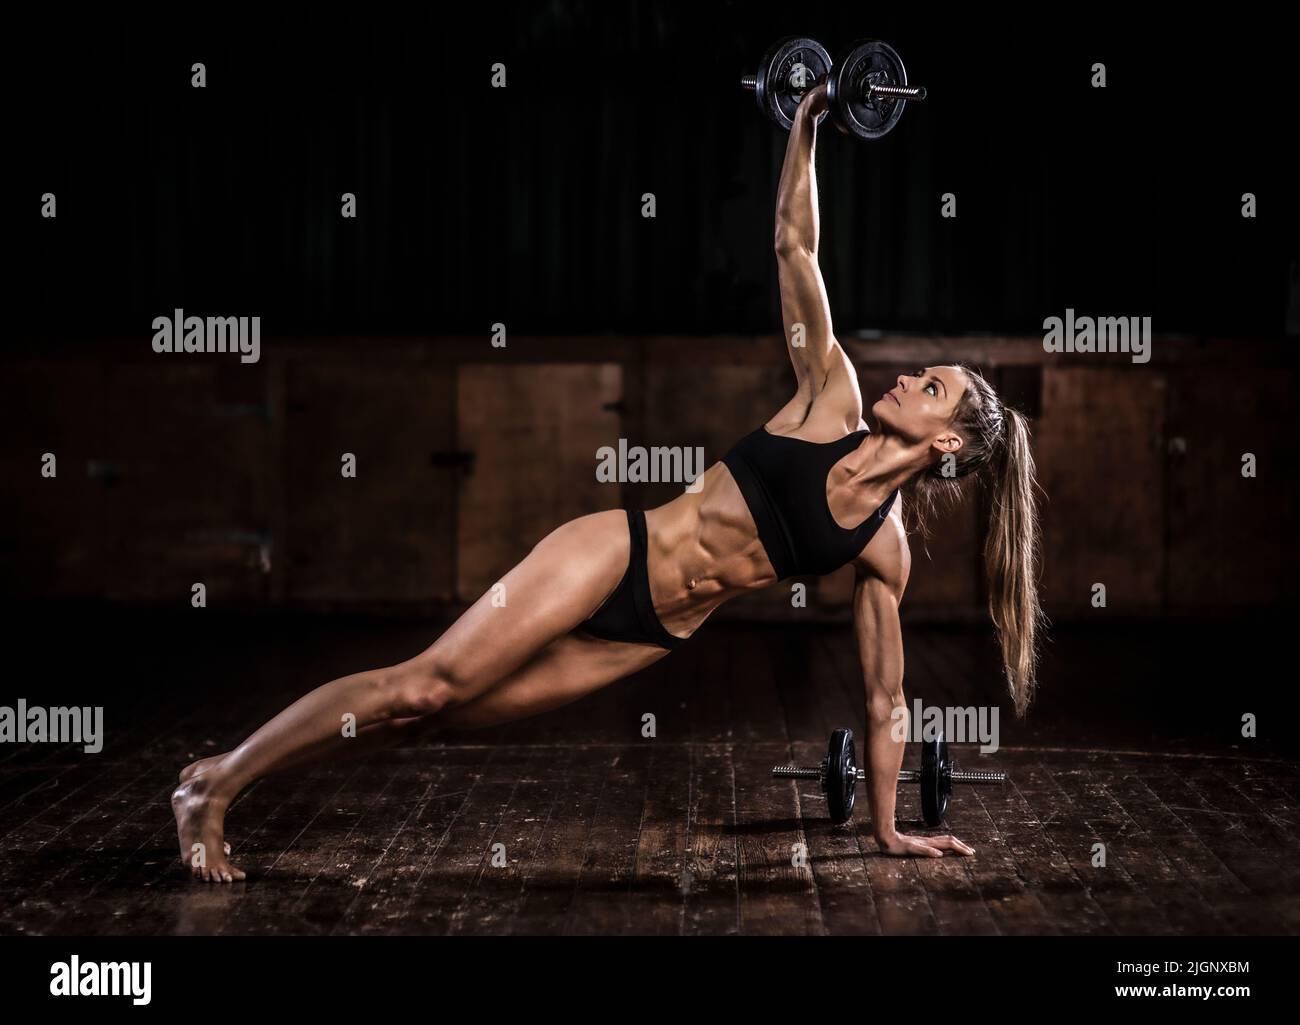 Female fitness model with toned body working out with weights, UK Stock Photo